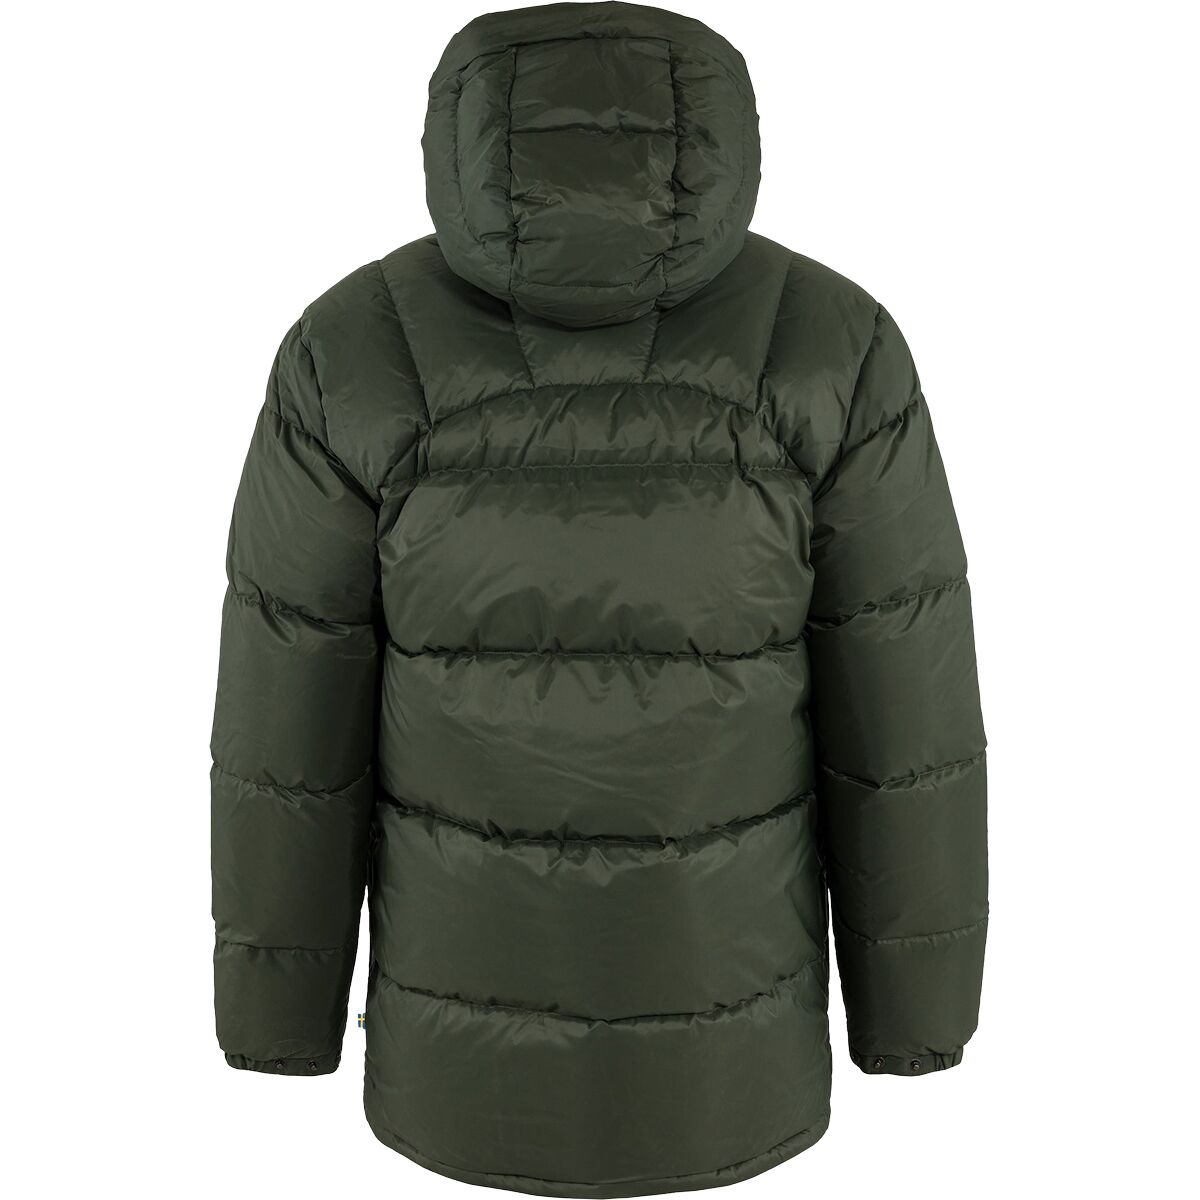 Expedition Down Jacket - Men's